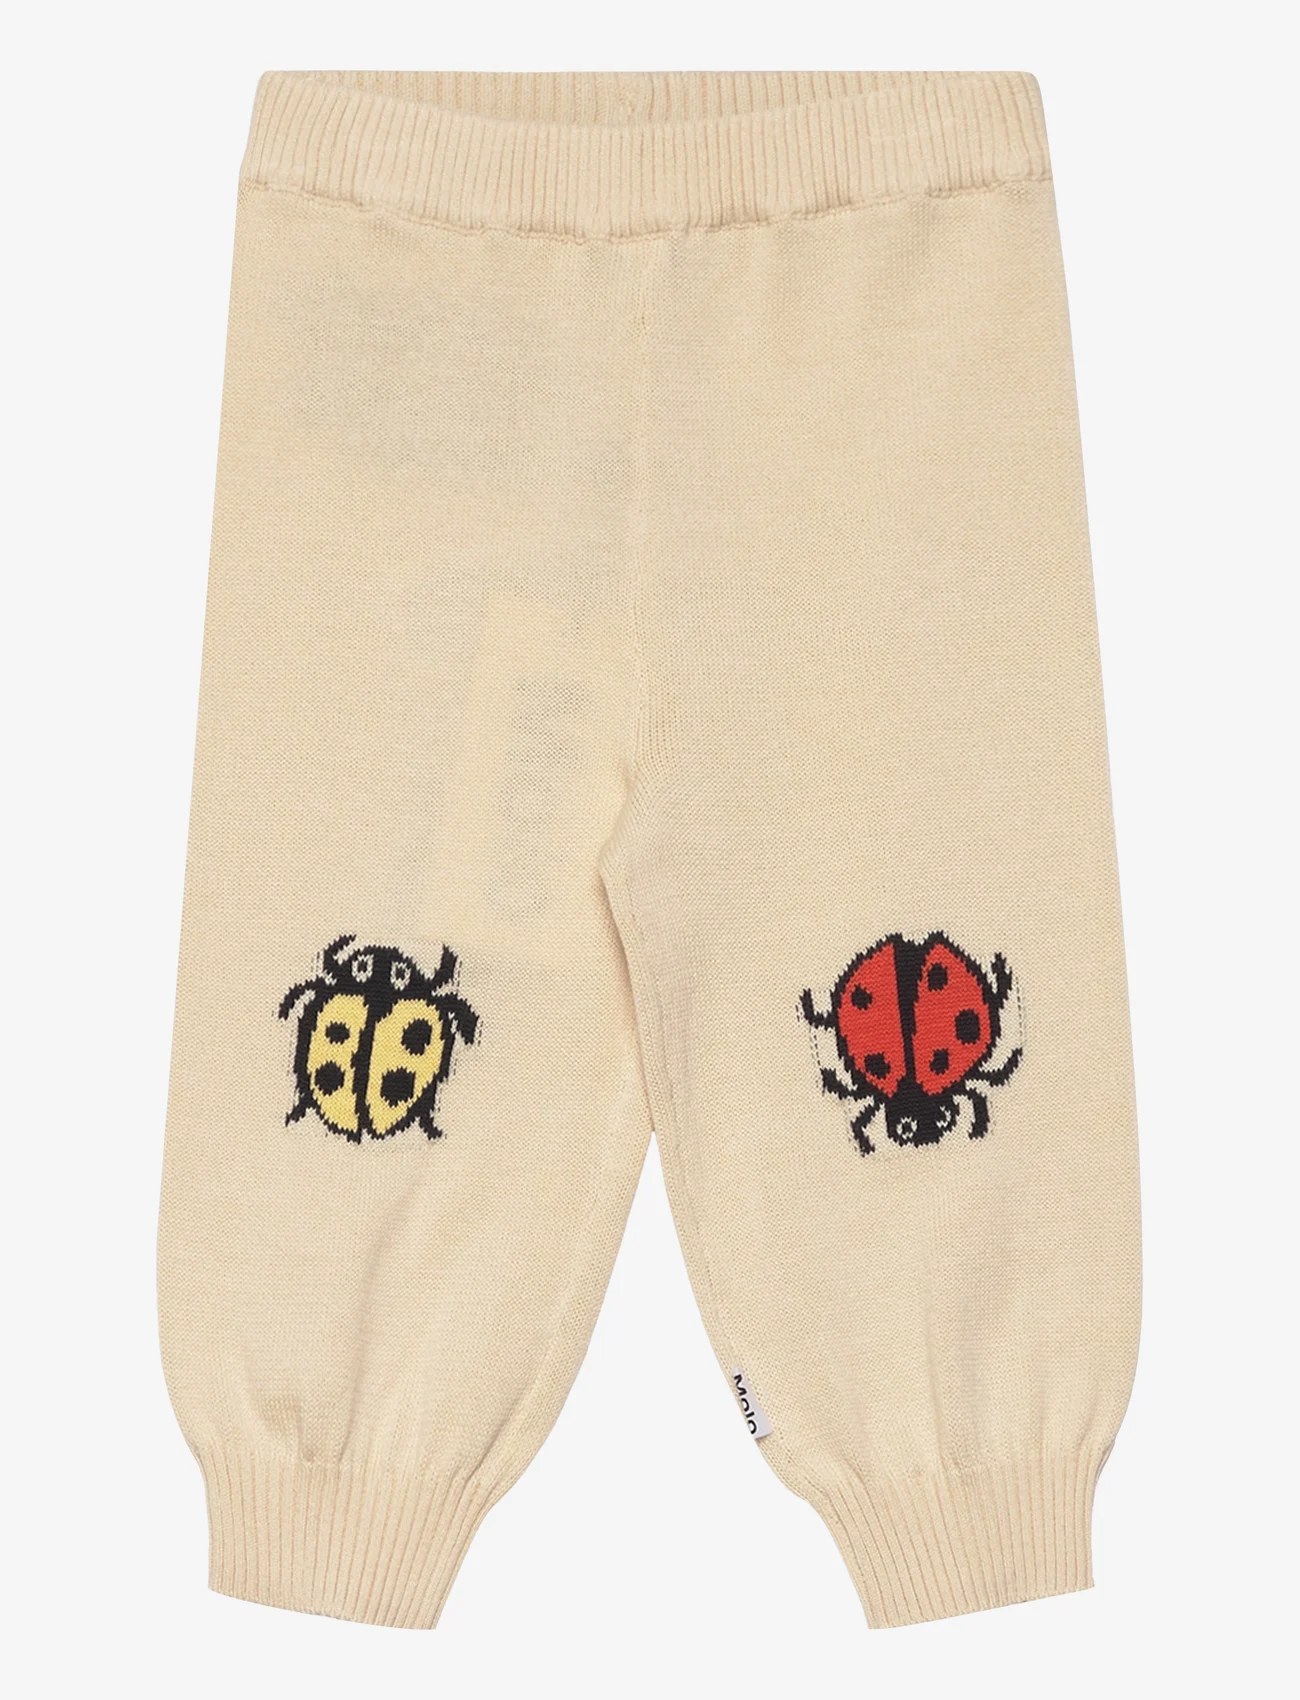 Molo - Sol - baby trousers - crawlies - 0